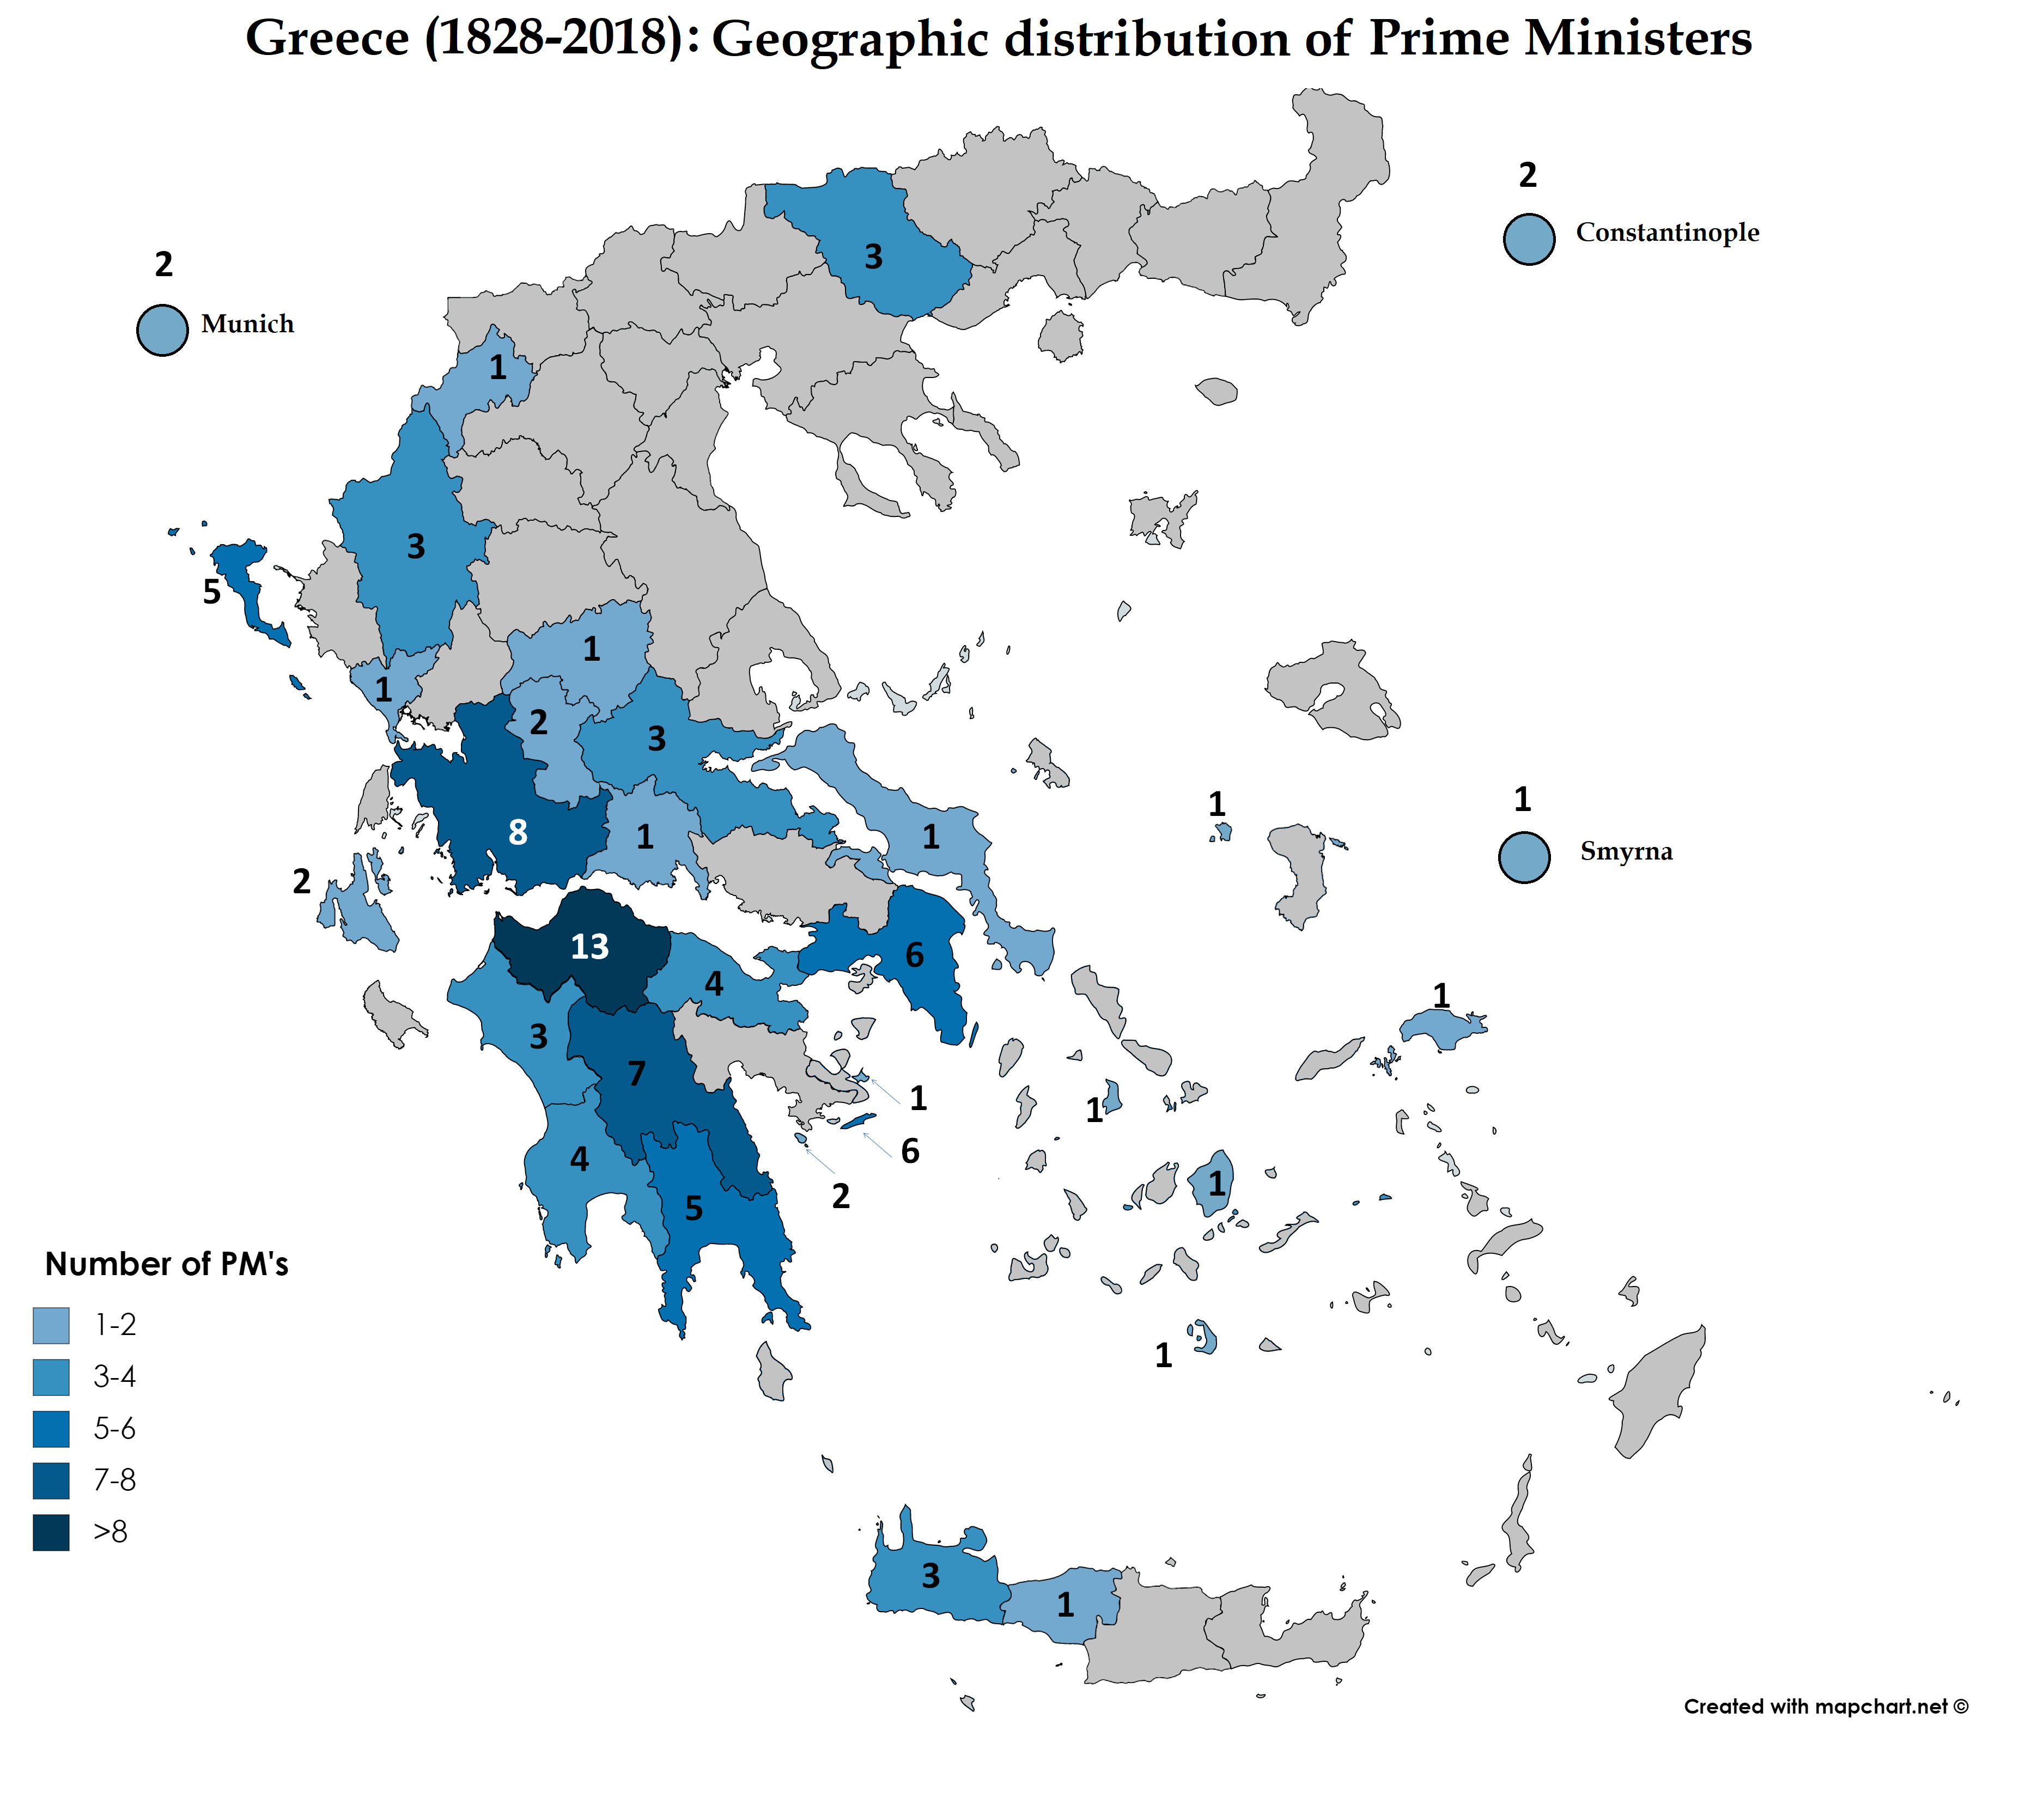 Prime Ministers of Greece geographic distribution